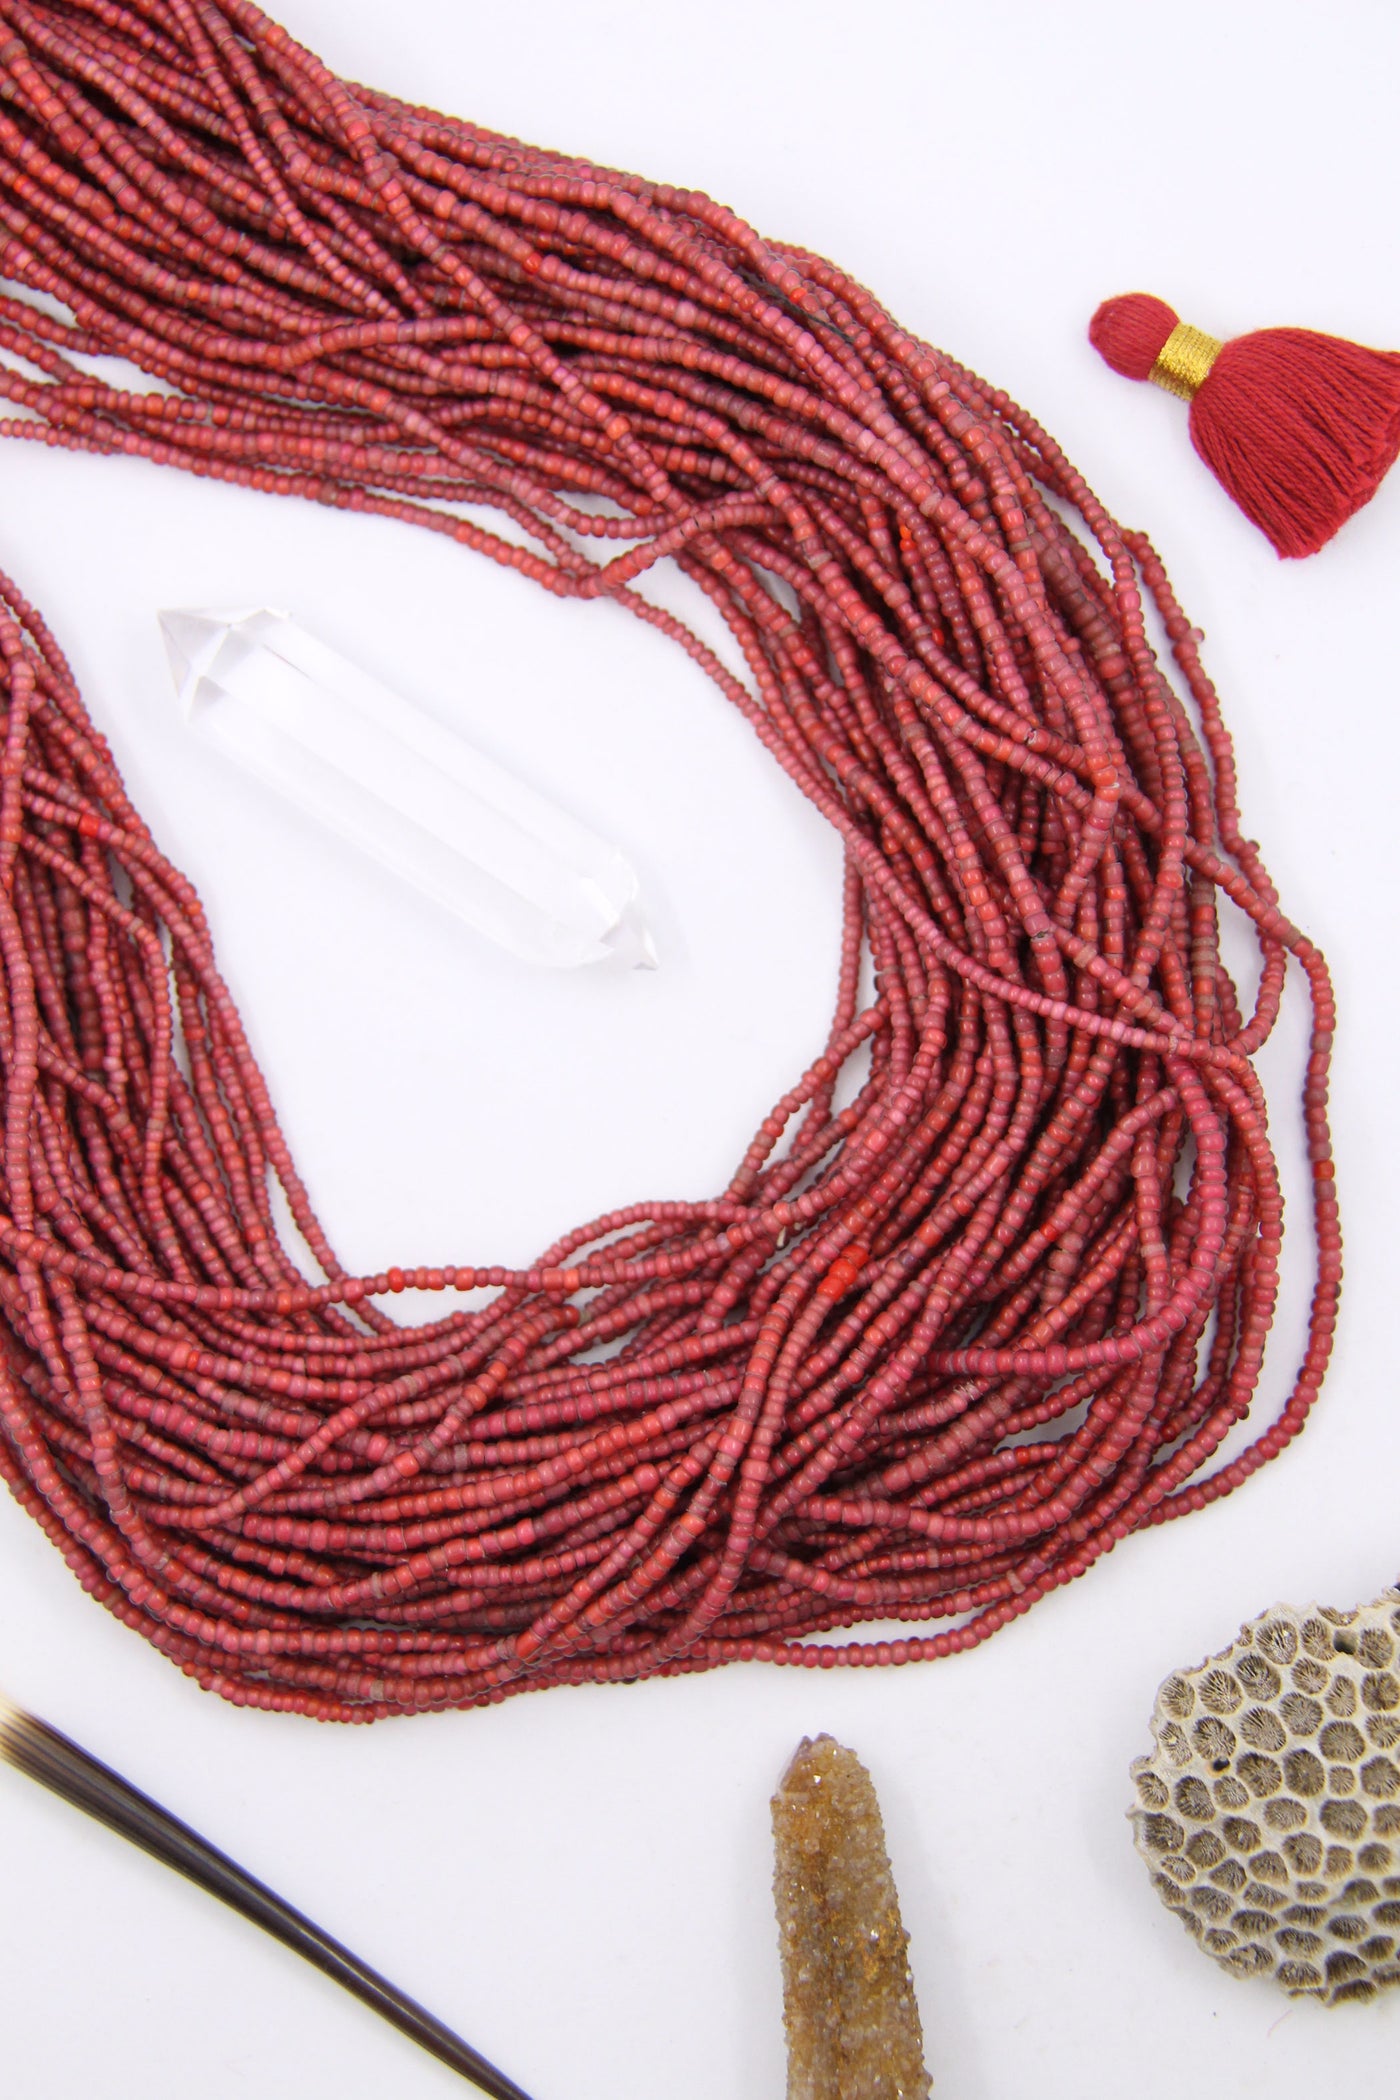 Vintage Ruby White Heart Beads, Antique African Beaded Necklace